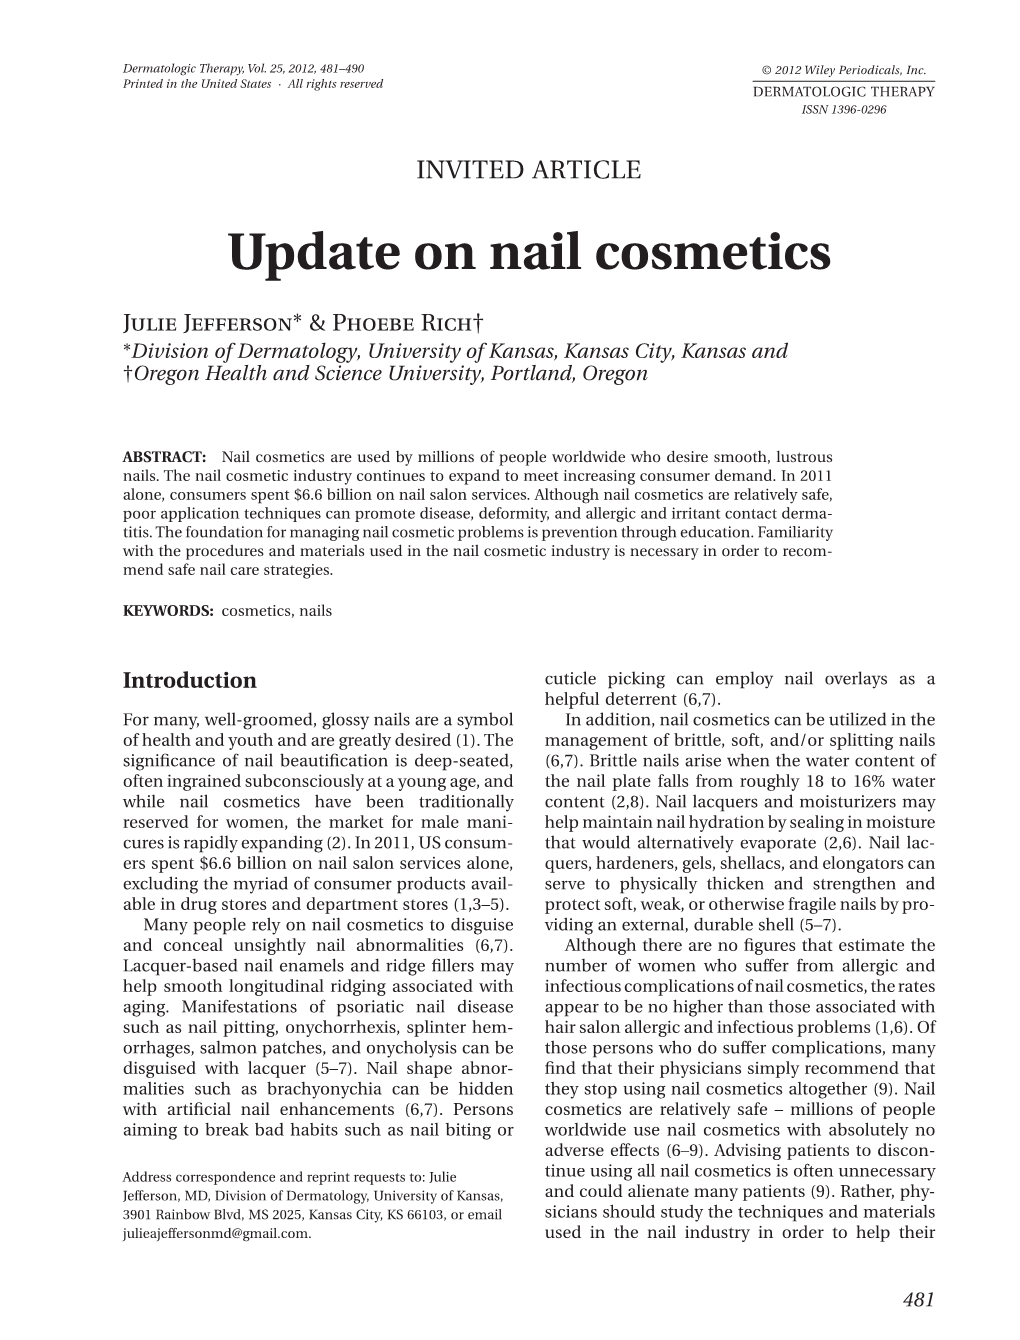 Update on Nail Cosmetics